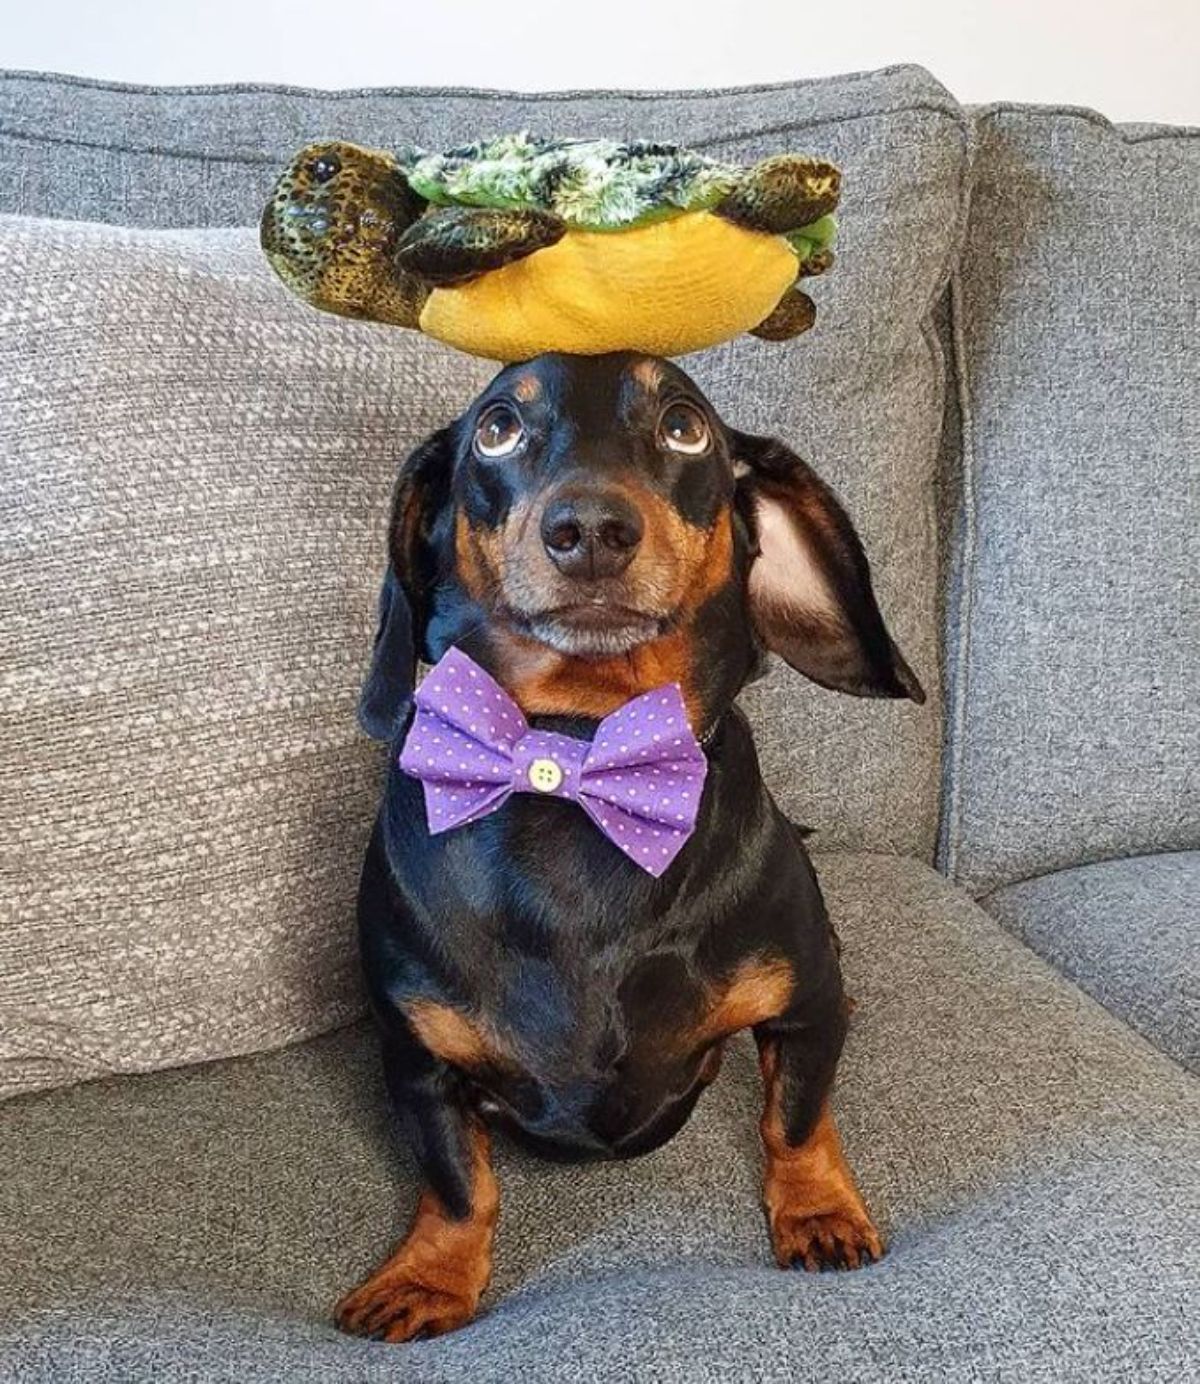 black and brown dachshund with a turtle stuffed toy on the head and the dog is wearing a purple bowtie with white dots